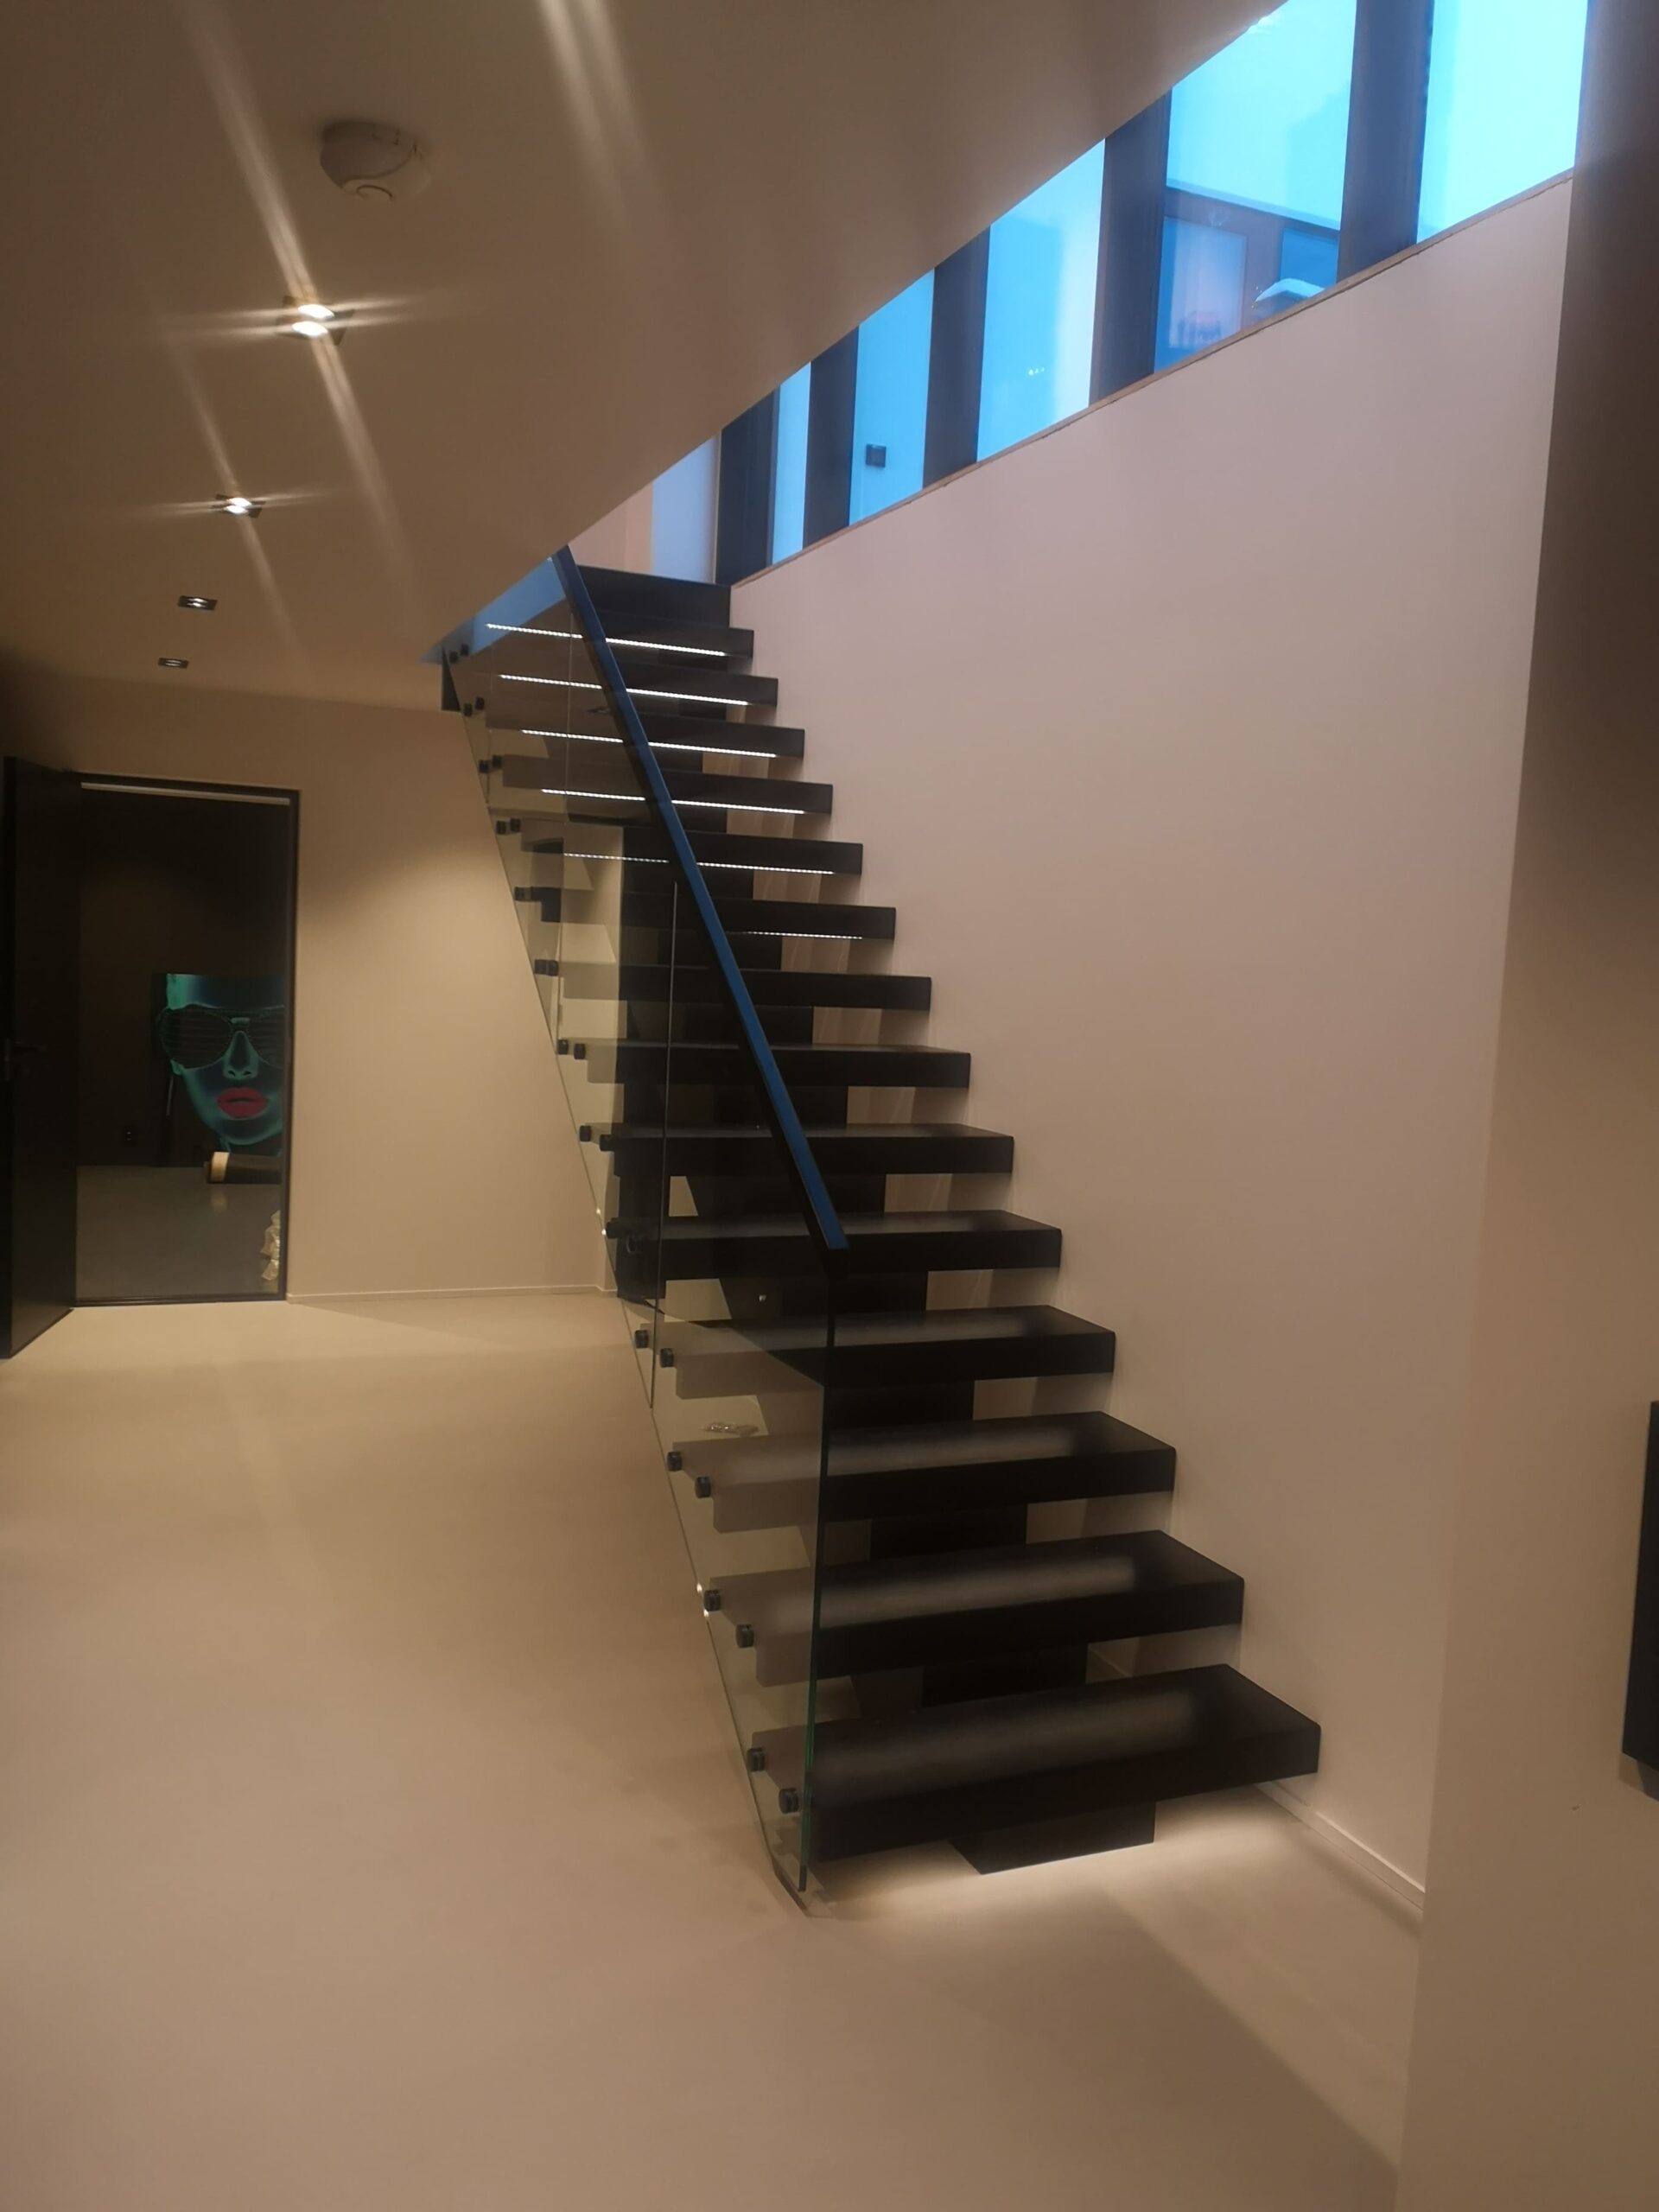 03. A black staircase with a wooden beam and a glass railing with LED lighting